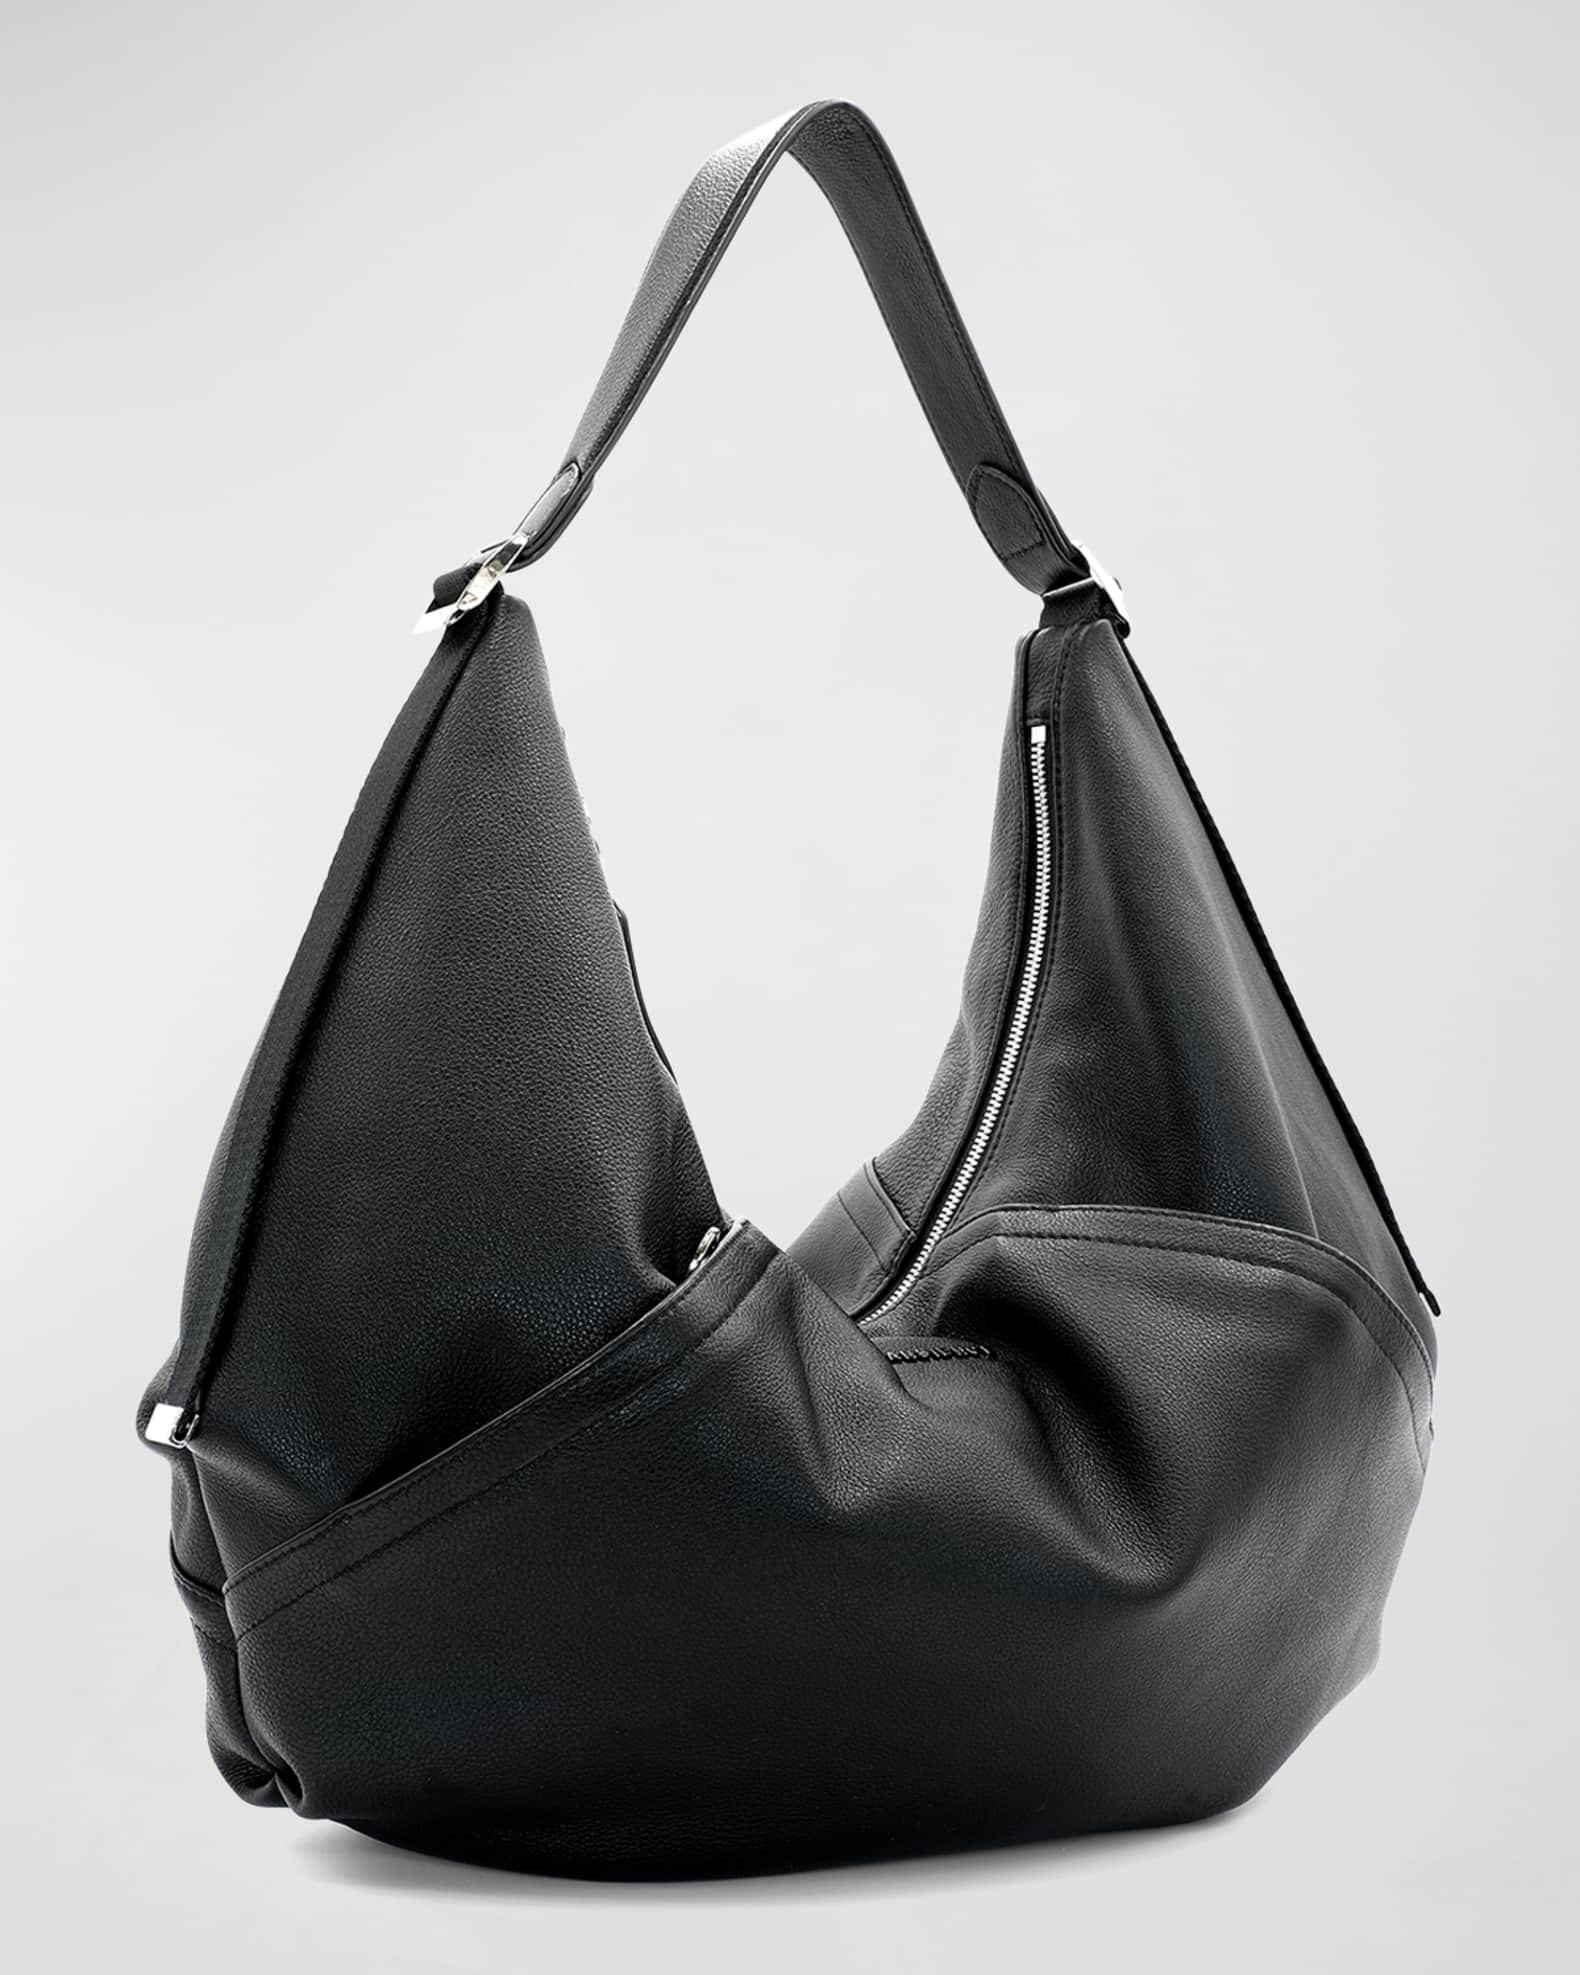 Women's Slouchy Leather Shoulder Bag